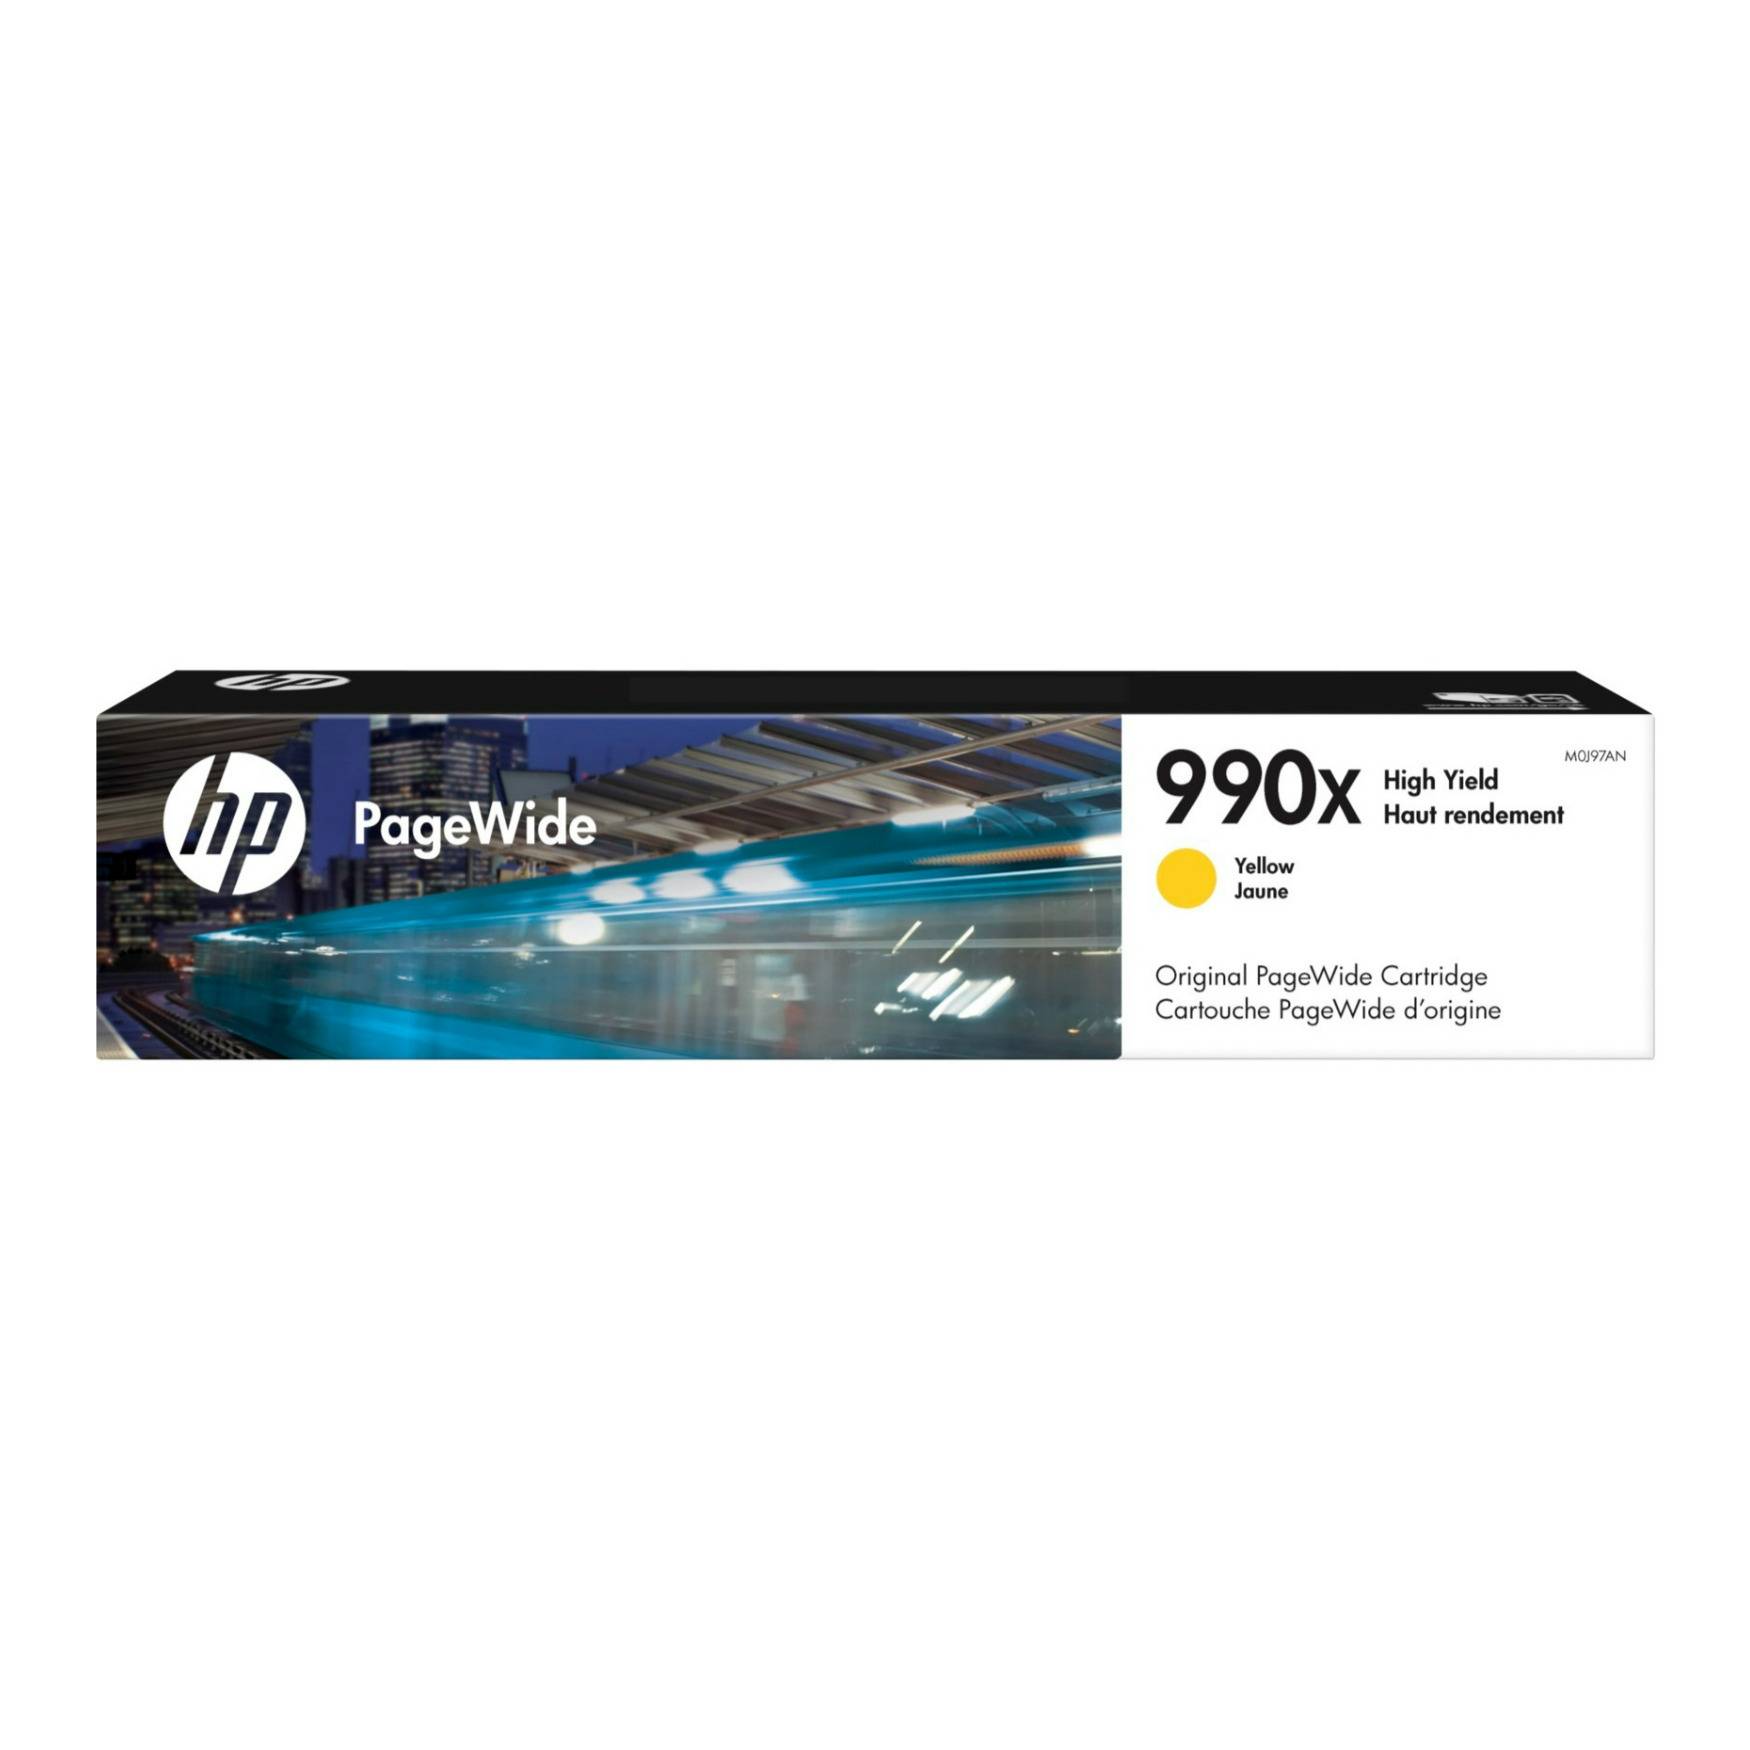 HP 990X High Yield Yellow Original PageWide Cartridge, Easy to Install (16,000 Pages Capacity)